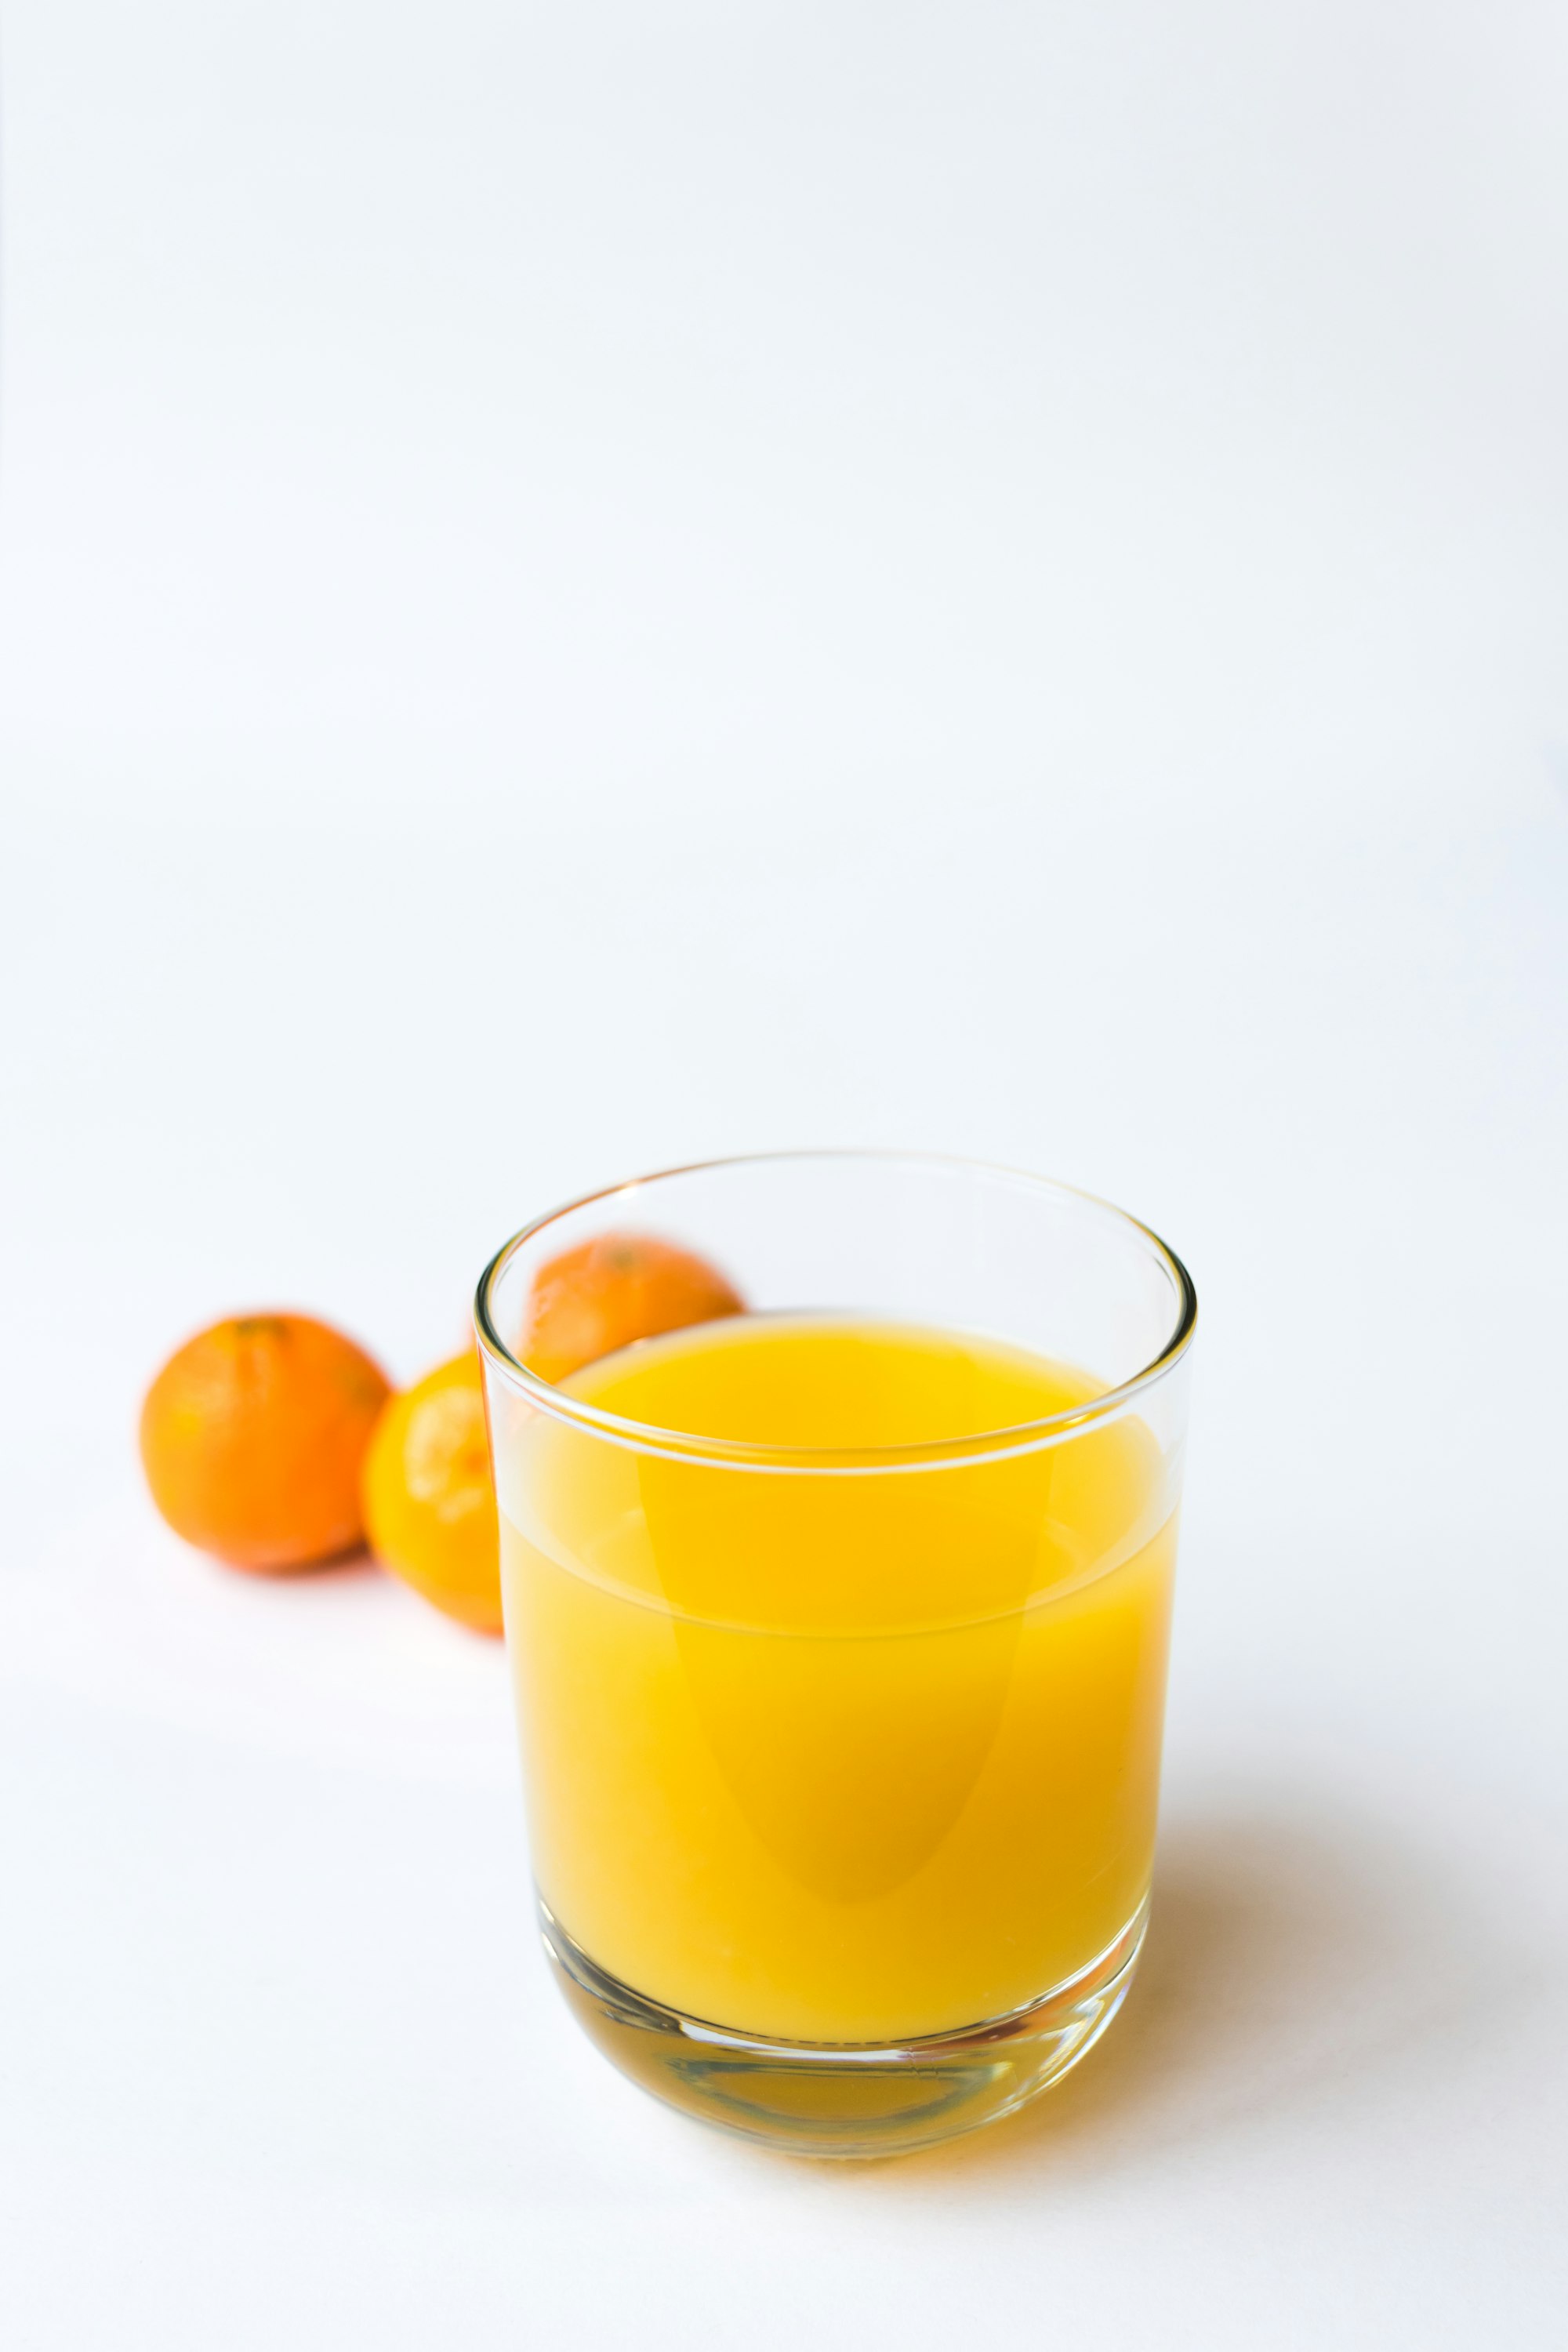 Who doesn't love a sweet glass of OJ? Didn't think so.